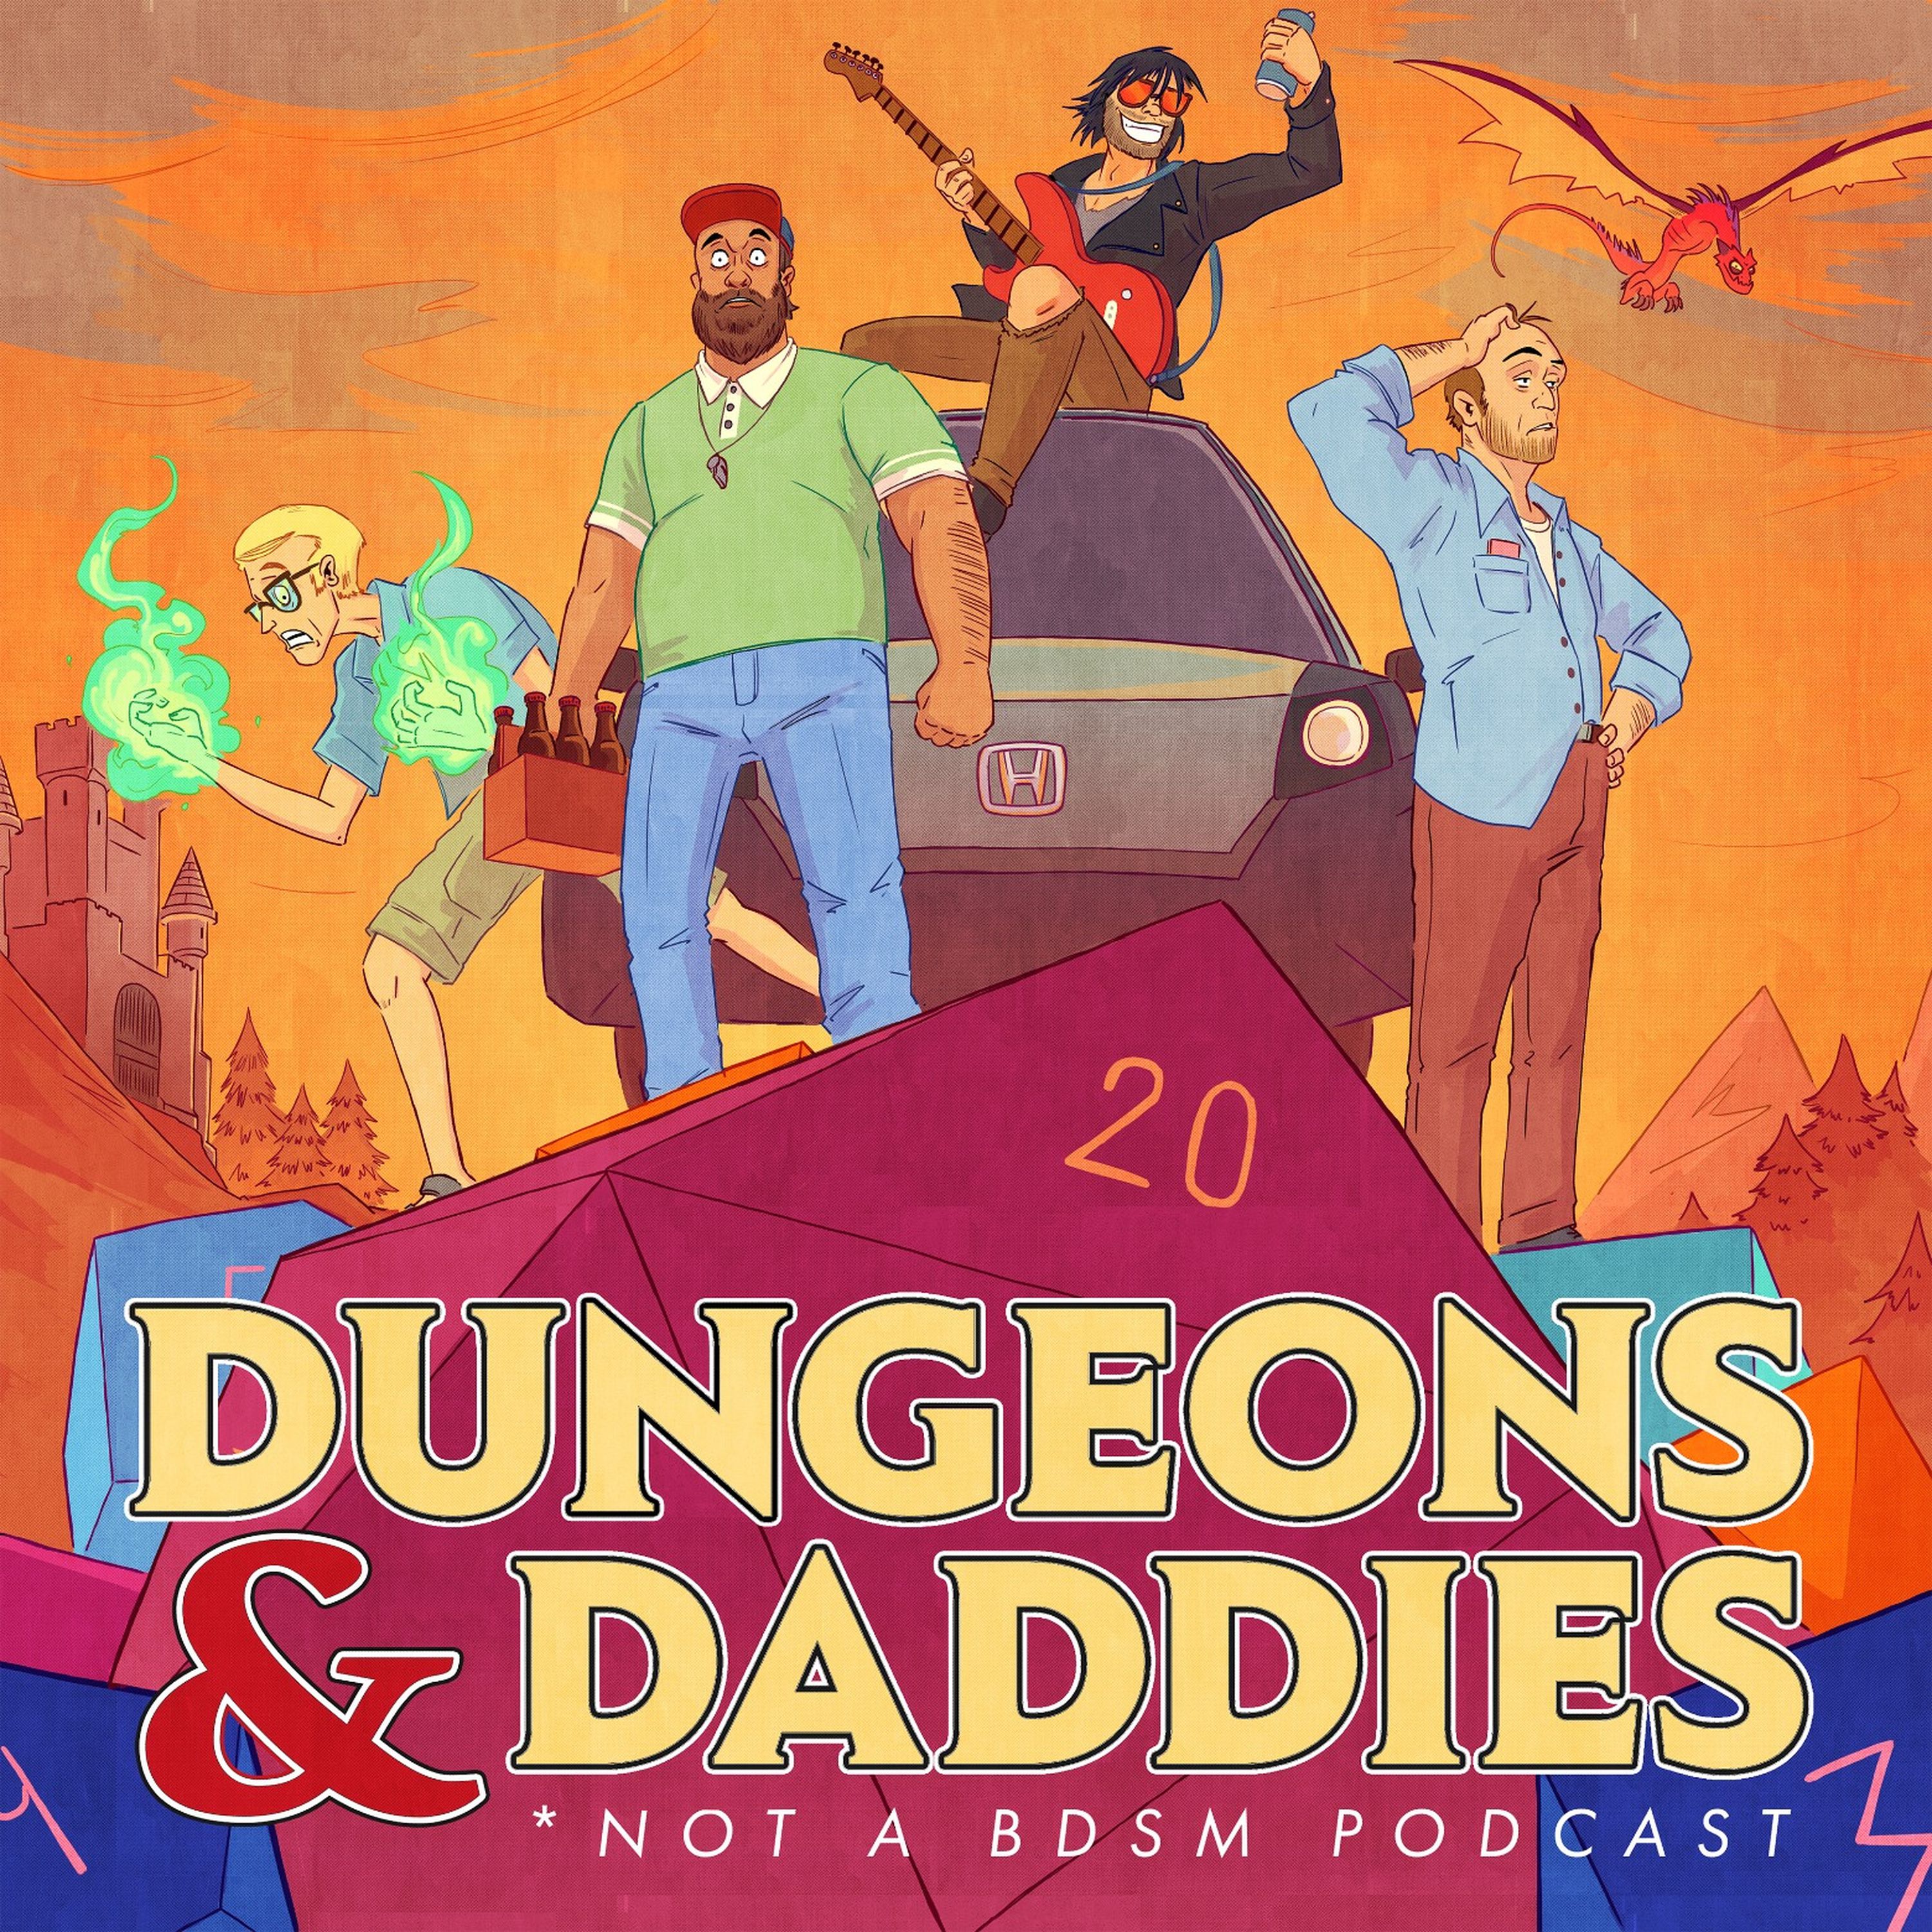 Ep. 15 - 8 Simple Rules for Dadding my Teenage Paeden